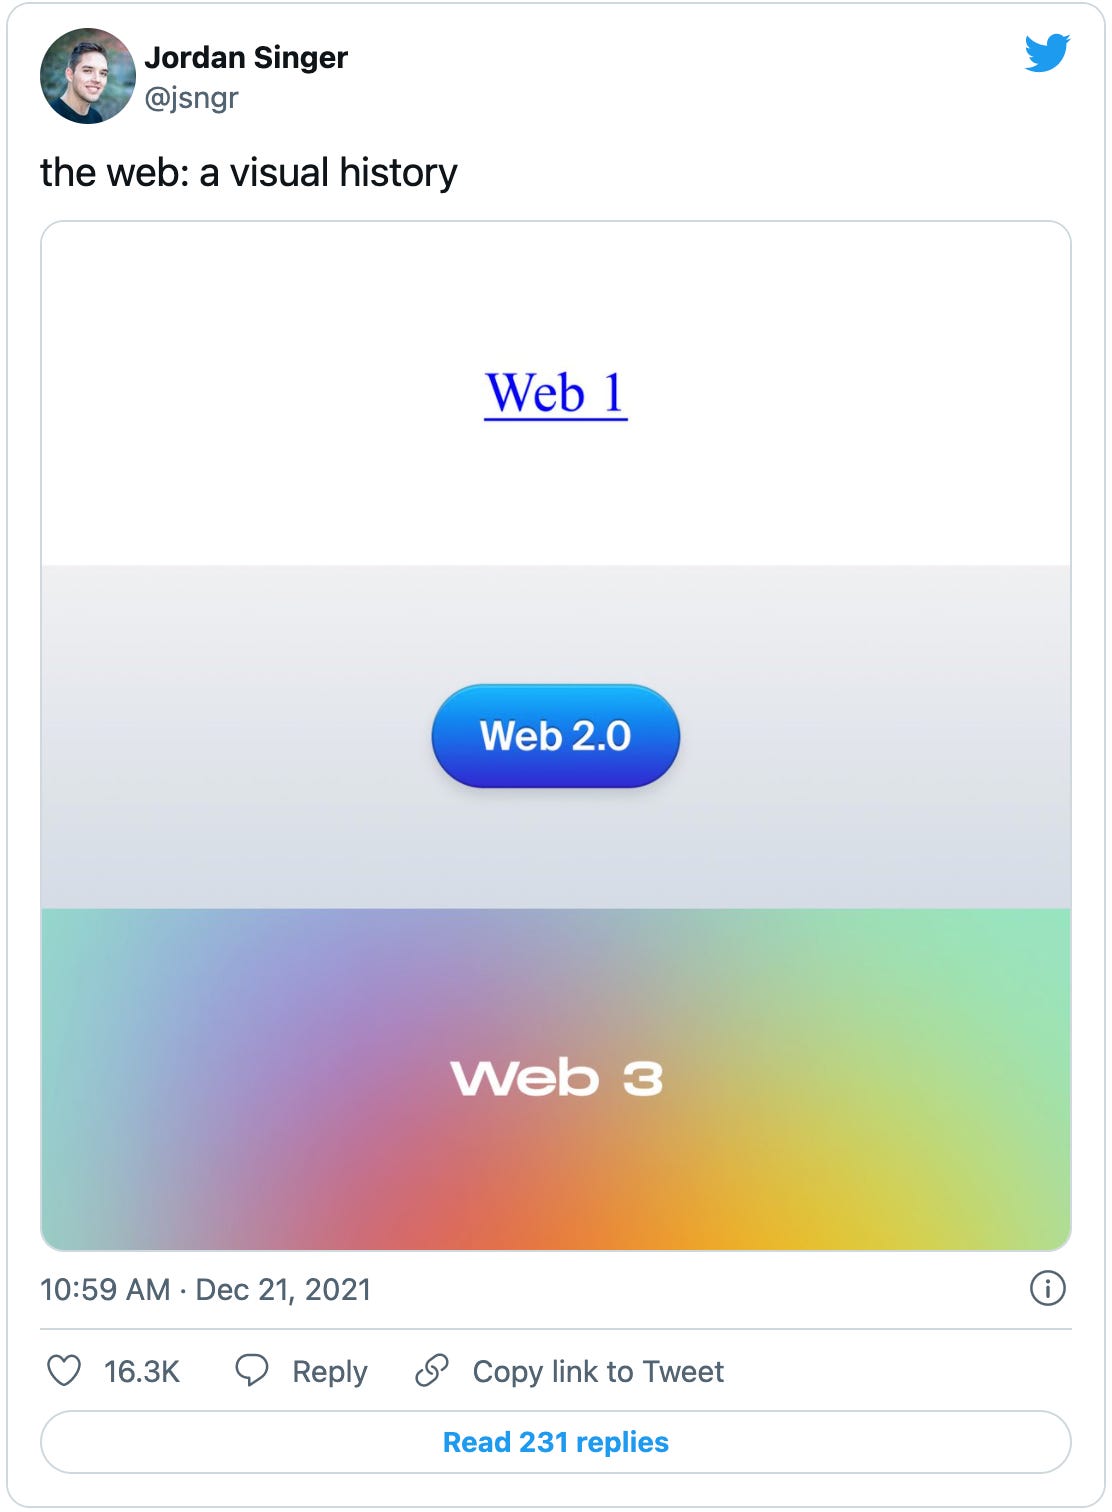 Tweet from Jordan Singer that reads “the web: a visual history,” and includes an image with a plain blue underlined old-style link “Web 1,” a pill-shaped skeumorphic gradient blue button that says “Web 2.0,” and a rainbow gradient background behind white sans-serif “Web 3.”  